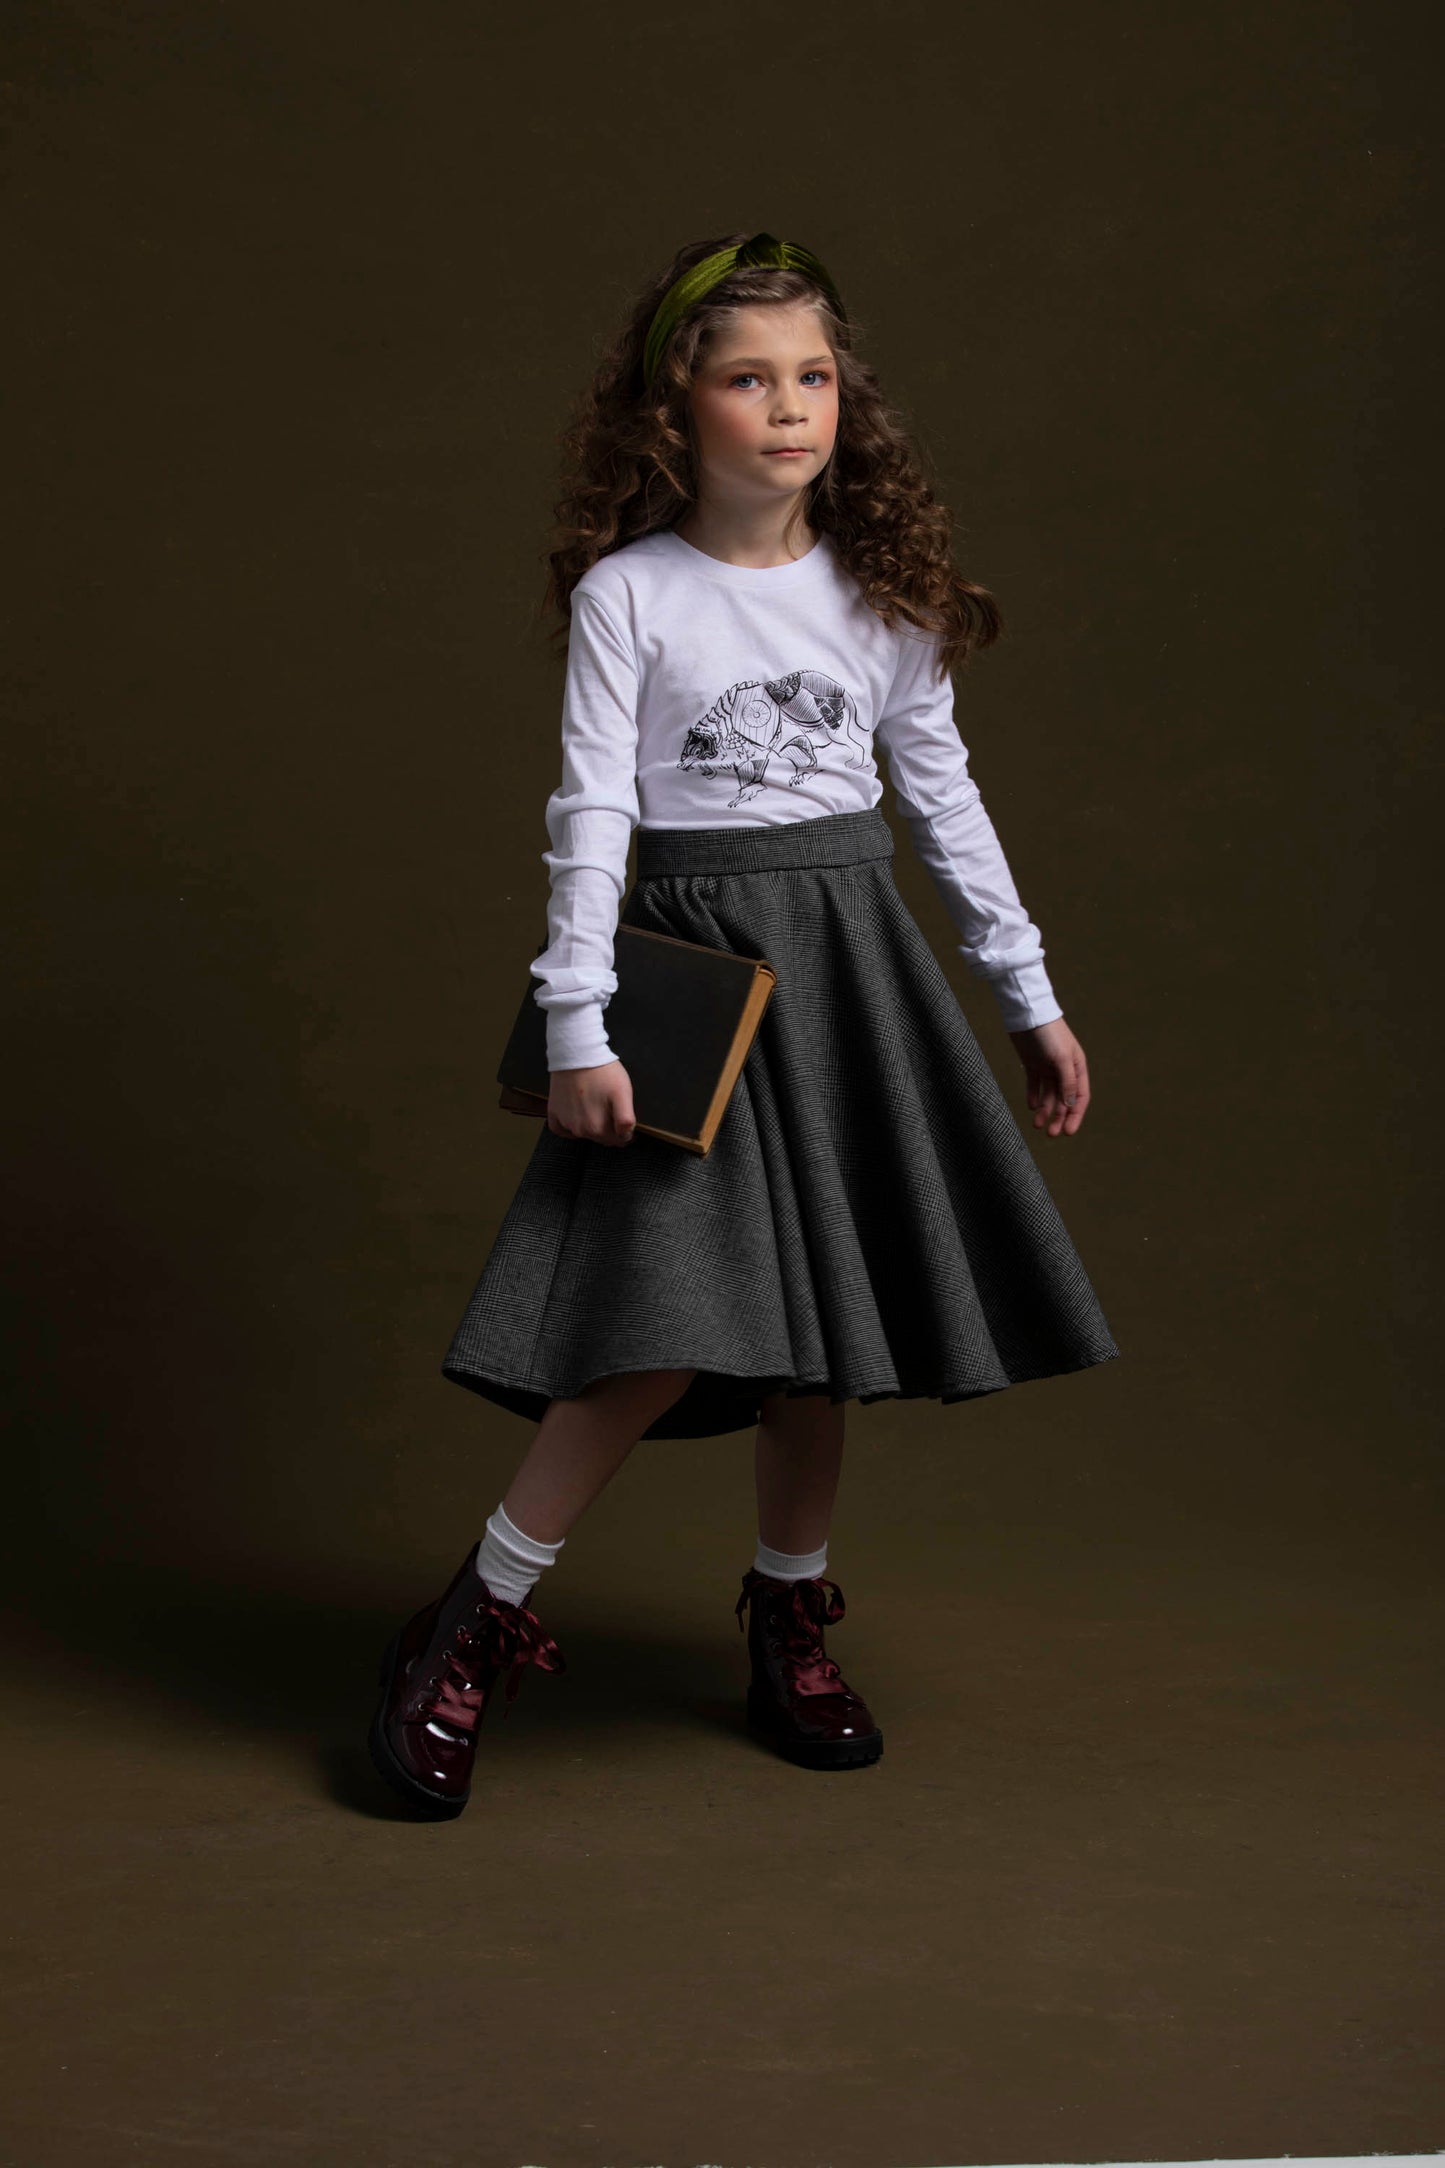 Beautiful young girl flares her scholars skirt paired with her lorek T-shirt while holding a book